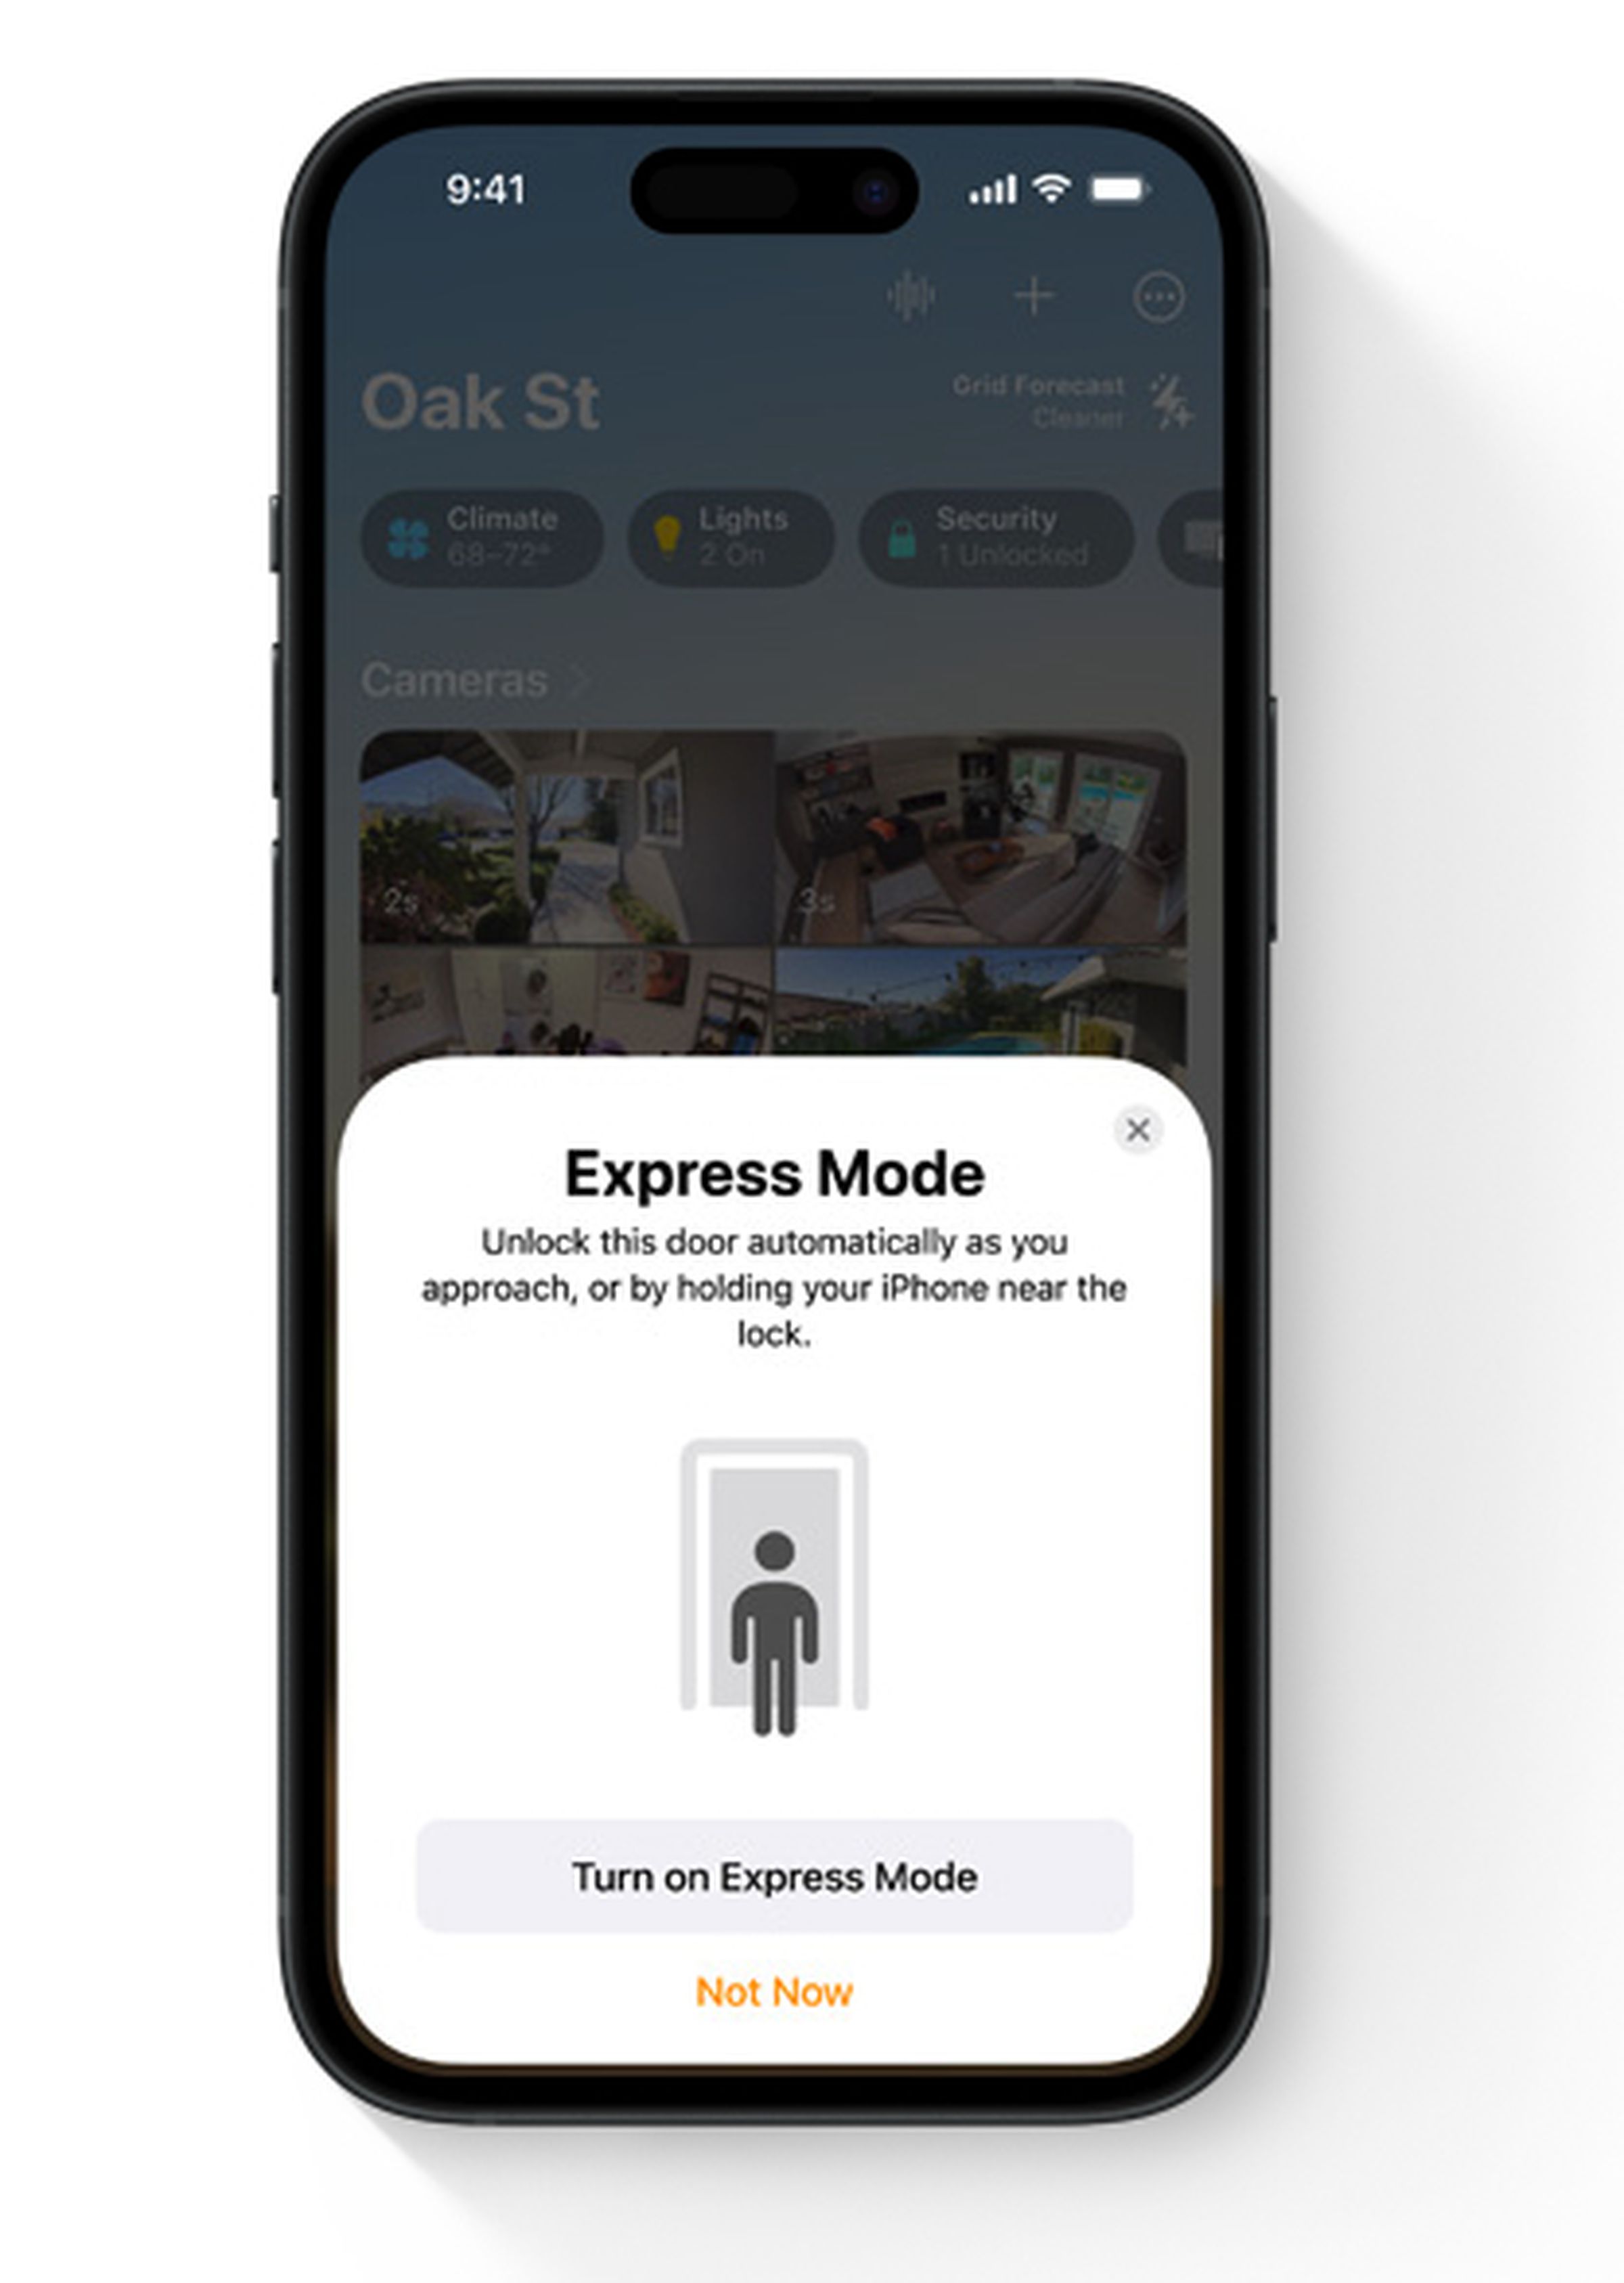 Express Mode will allow your smart lock to unlock automatically as you approach.